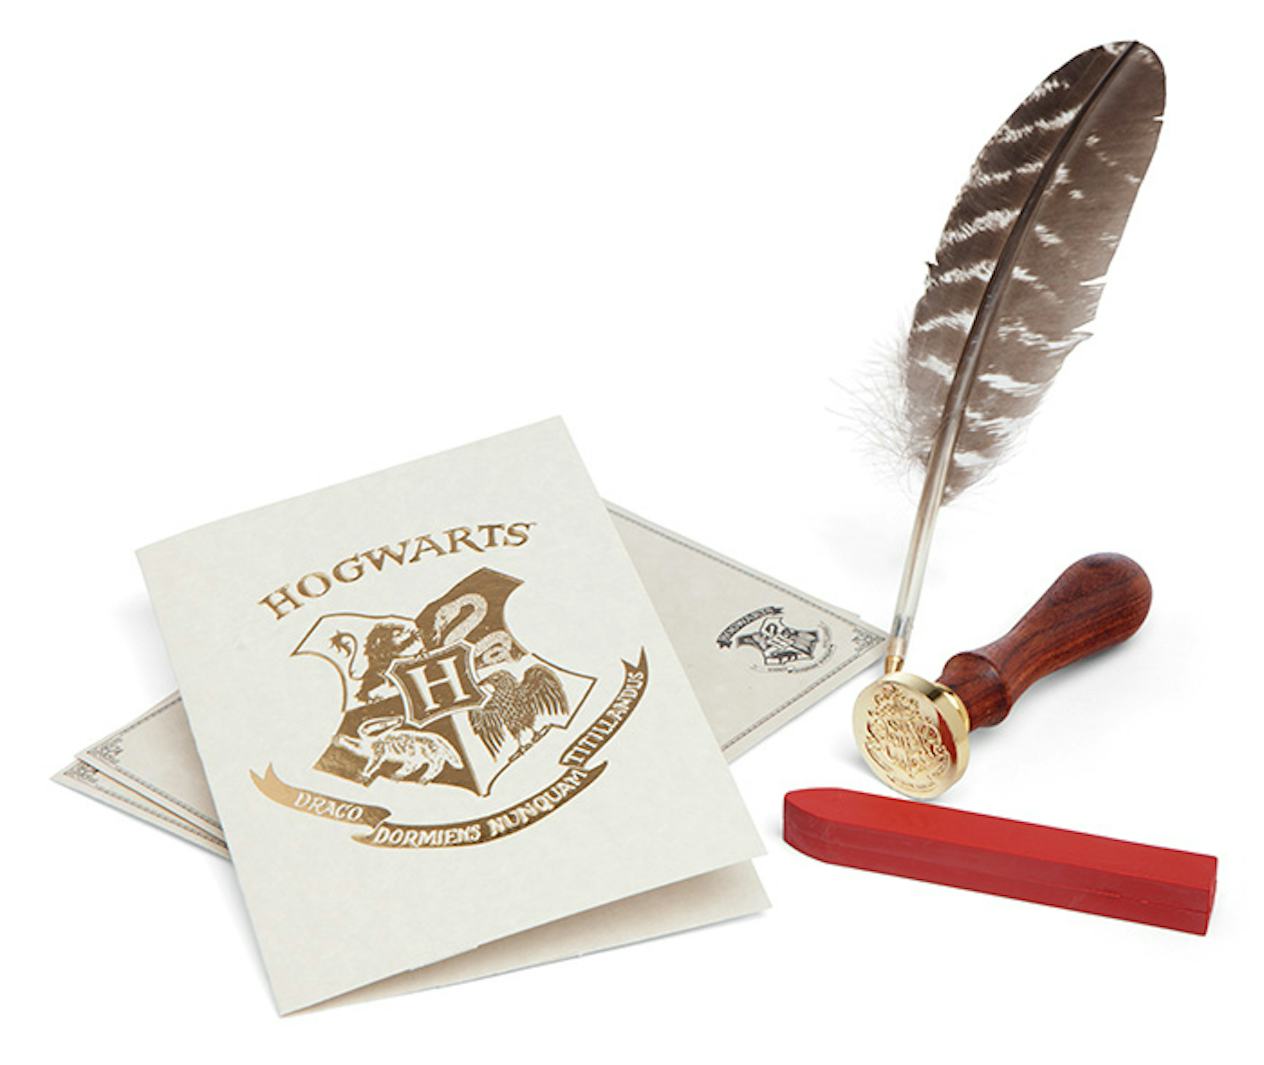 21 Harry Potter Gifts For Everyone In Your Life, Based On Their ...